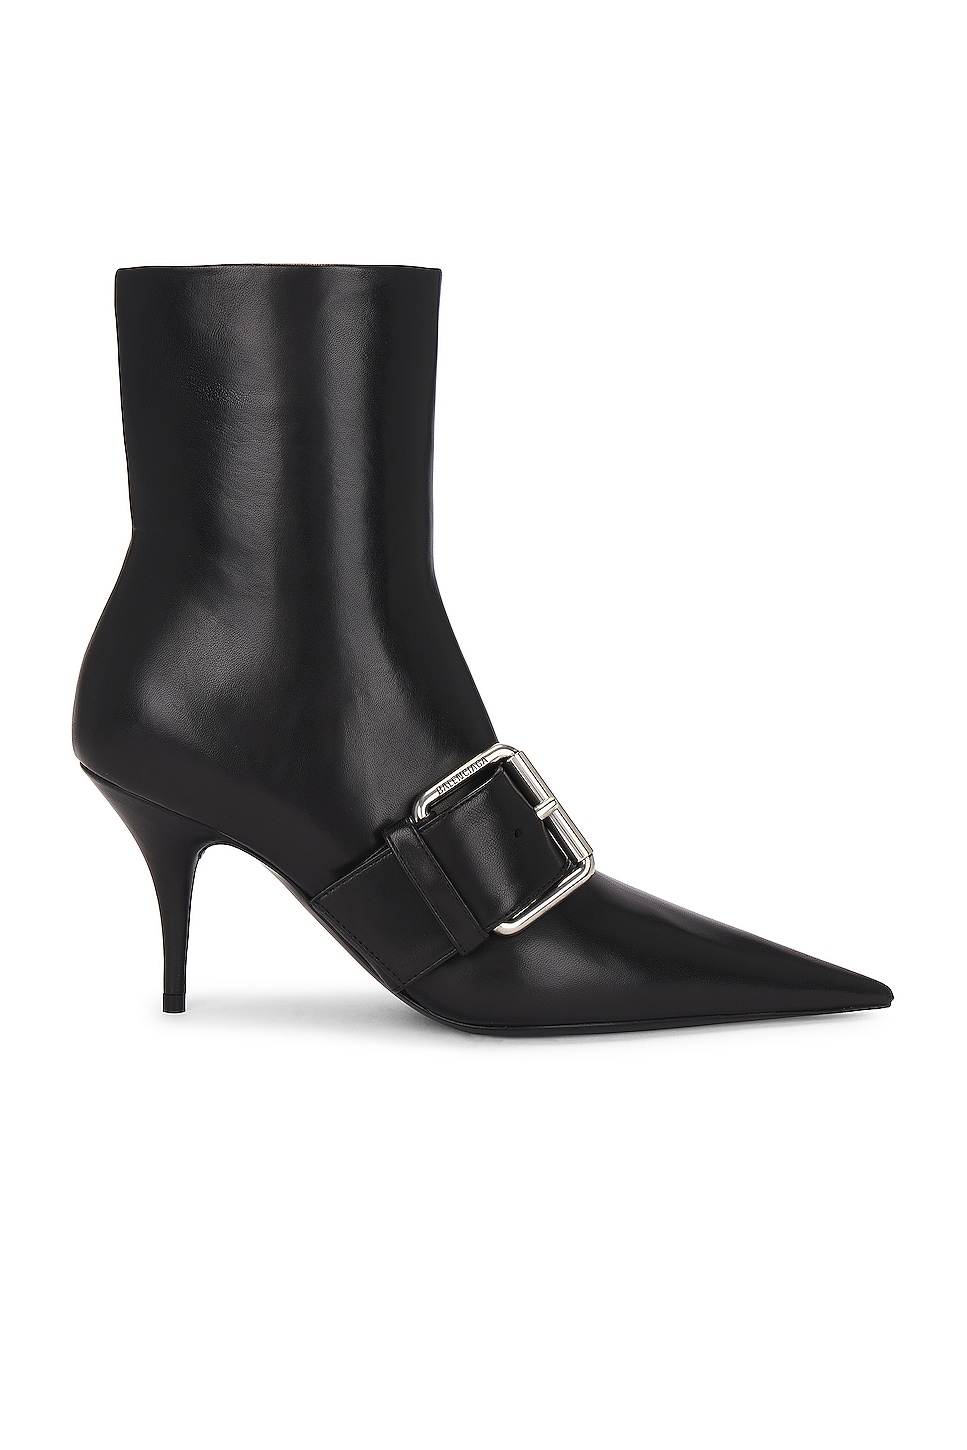 Image 1 of Balenciaga Knife Belt Bootie in Black & Silver